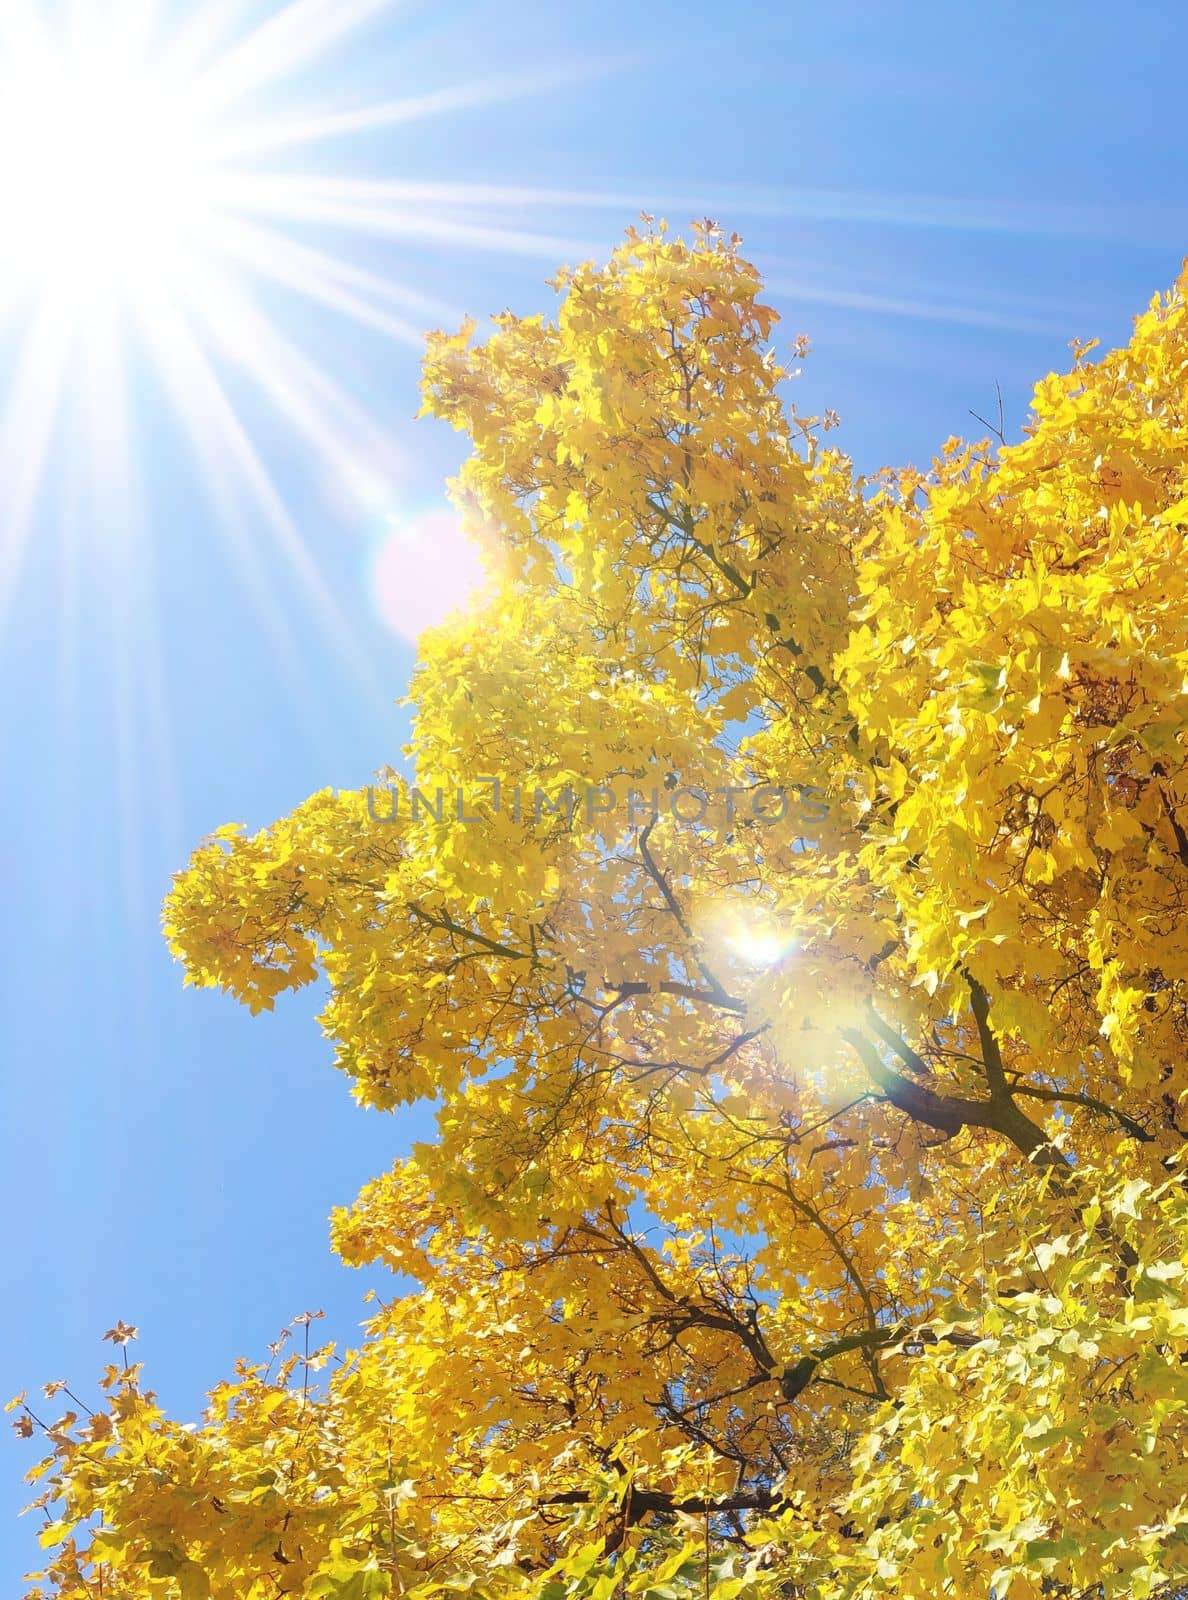 Autumn foliage with yellow leaves and sun rays. High quality photo